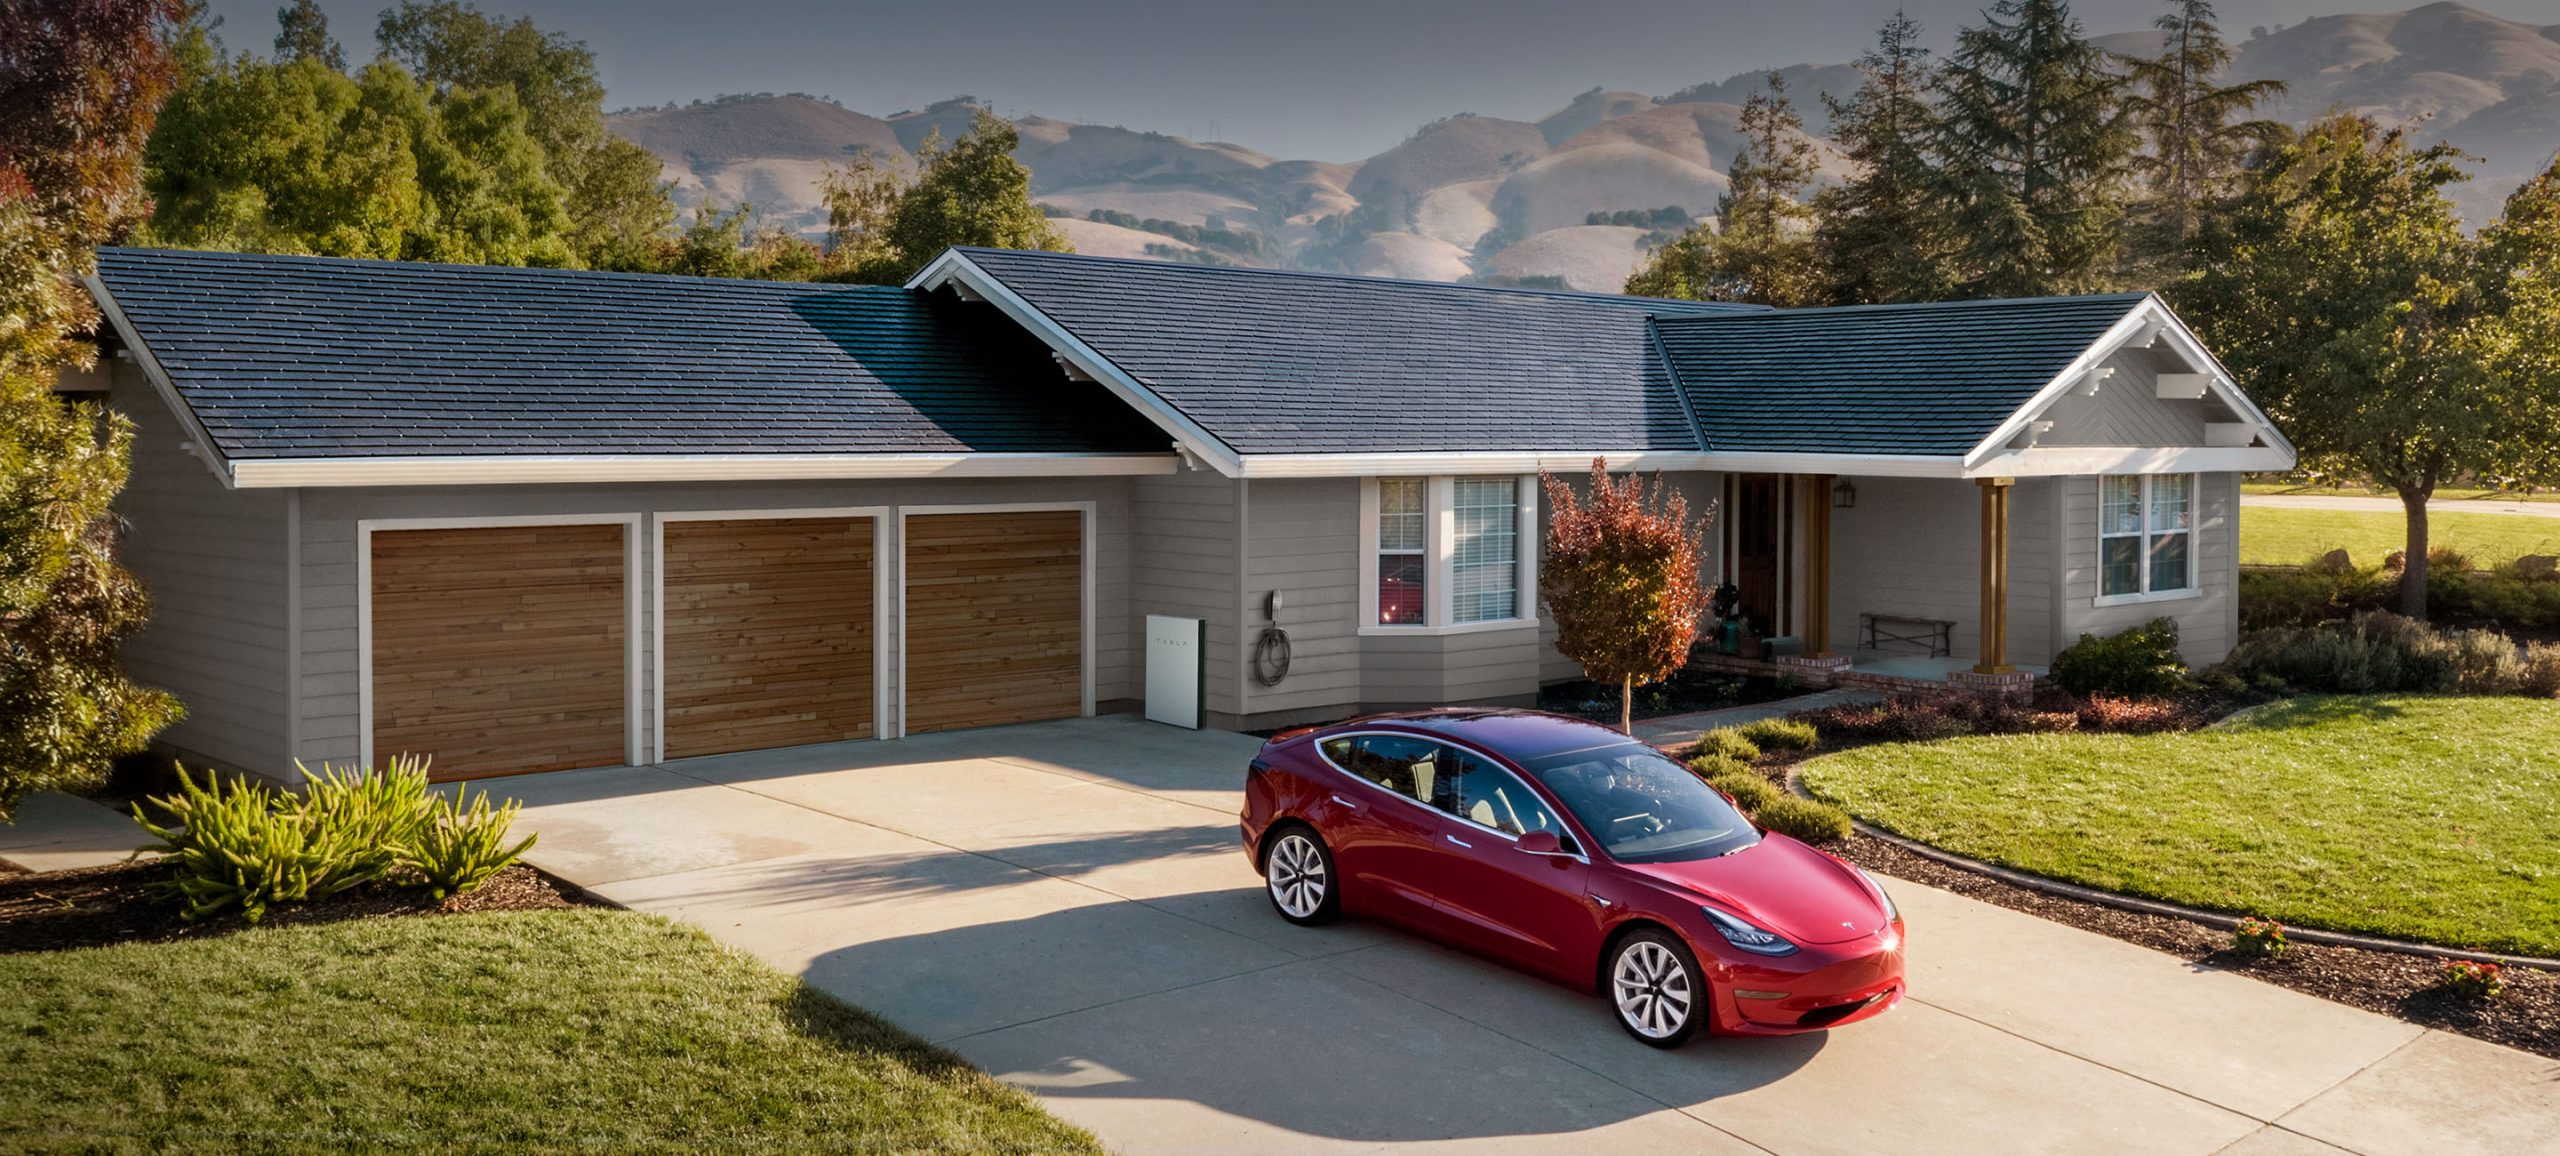 Tesla Solar Roof  A Piece of Beauty for your Dream Home ...